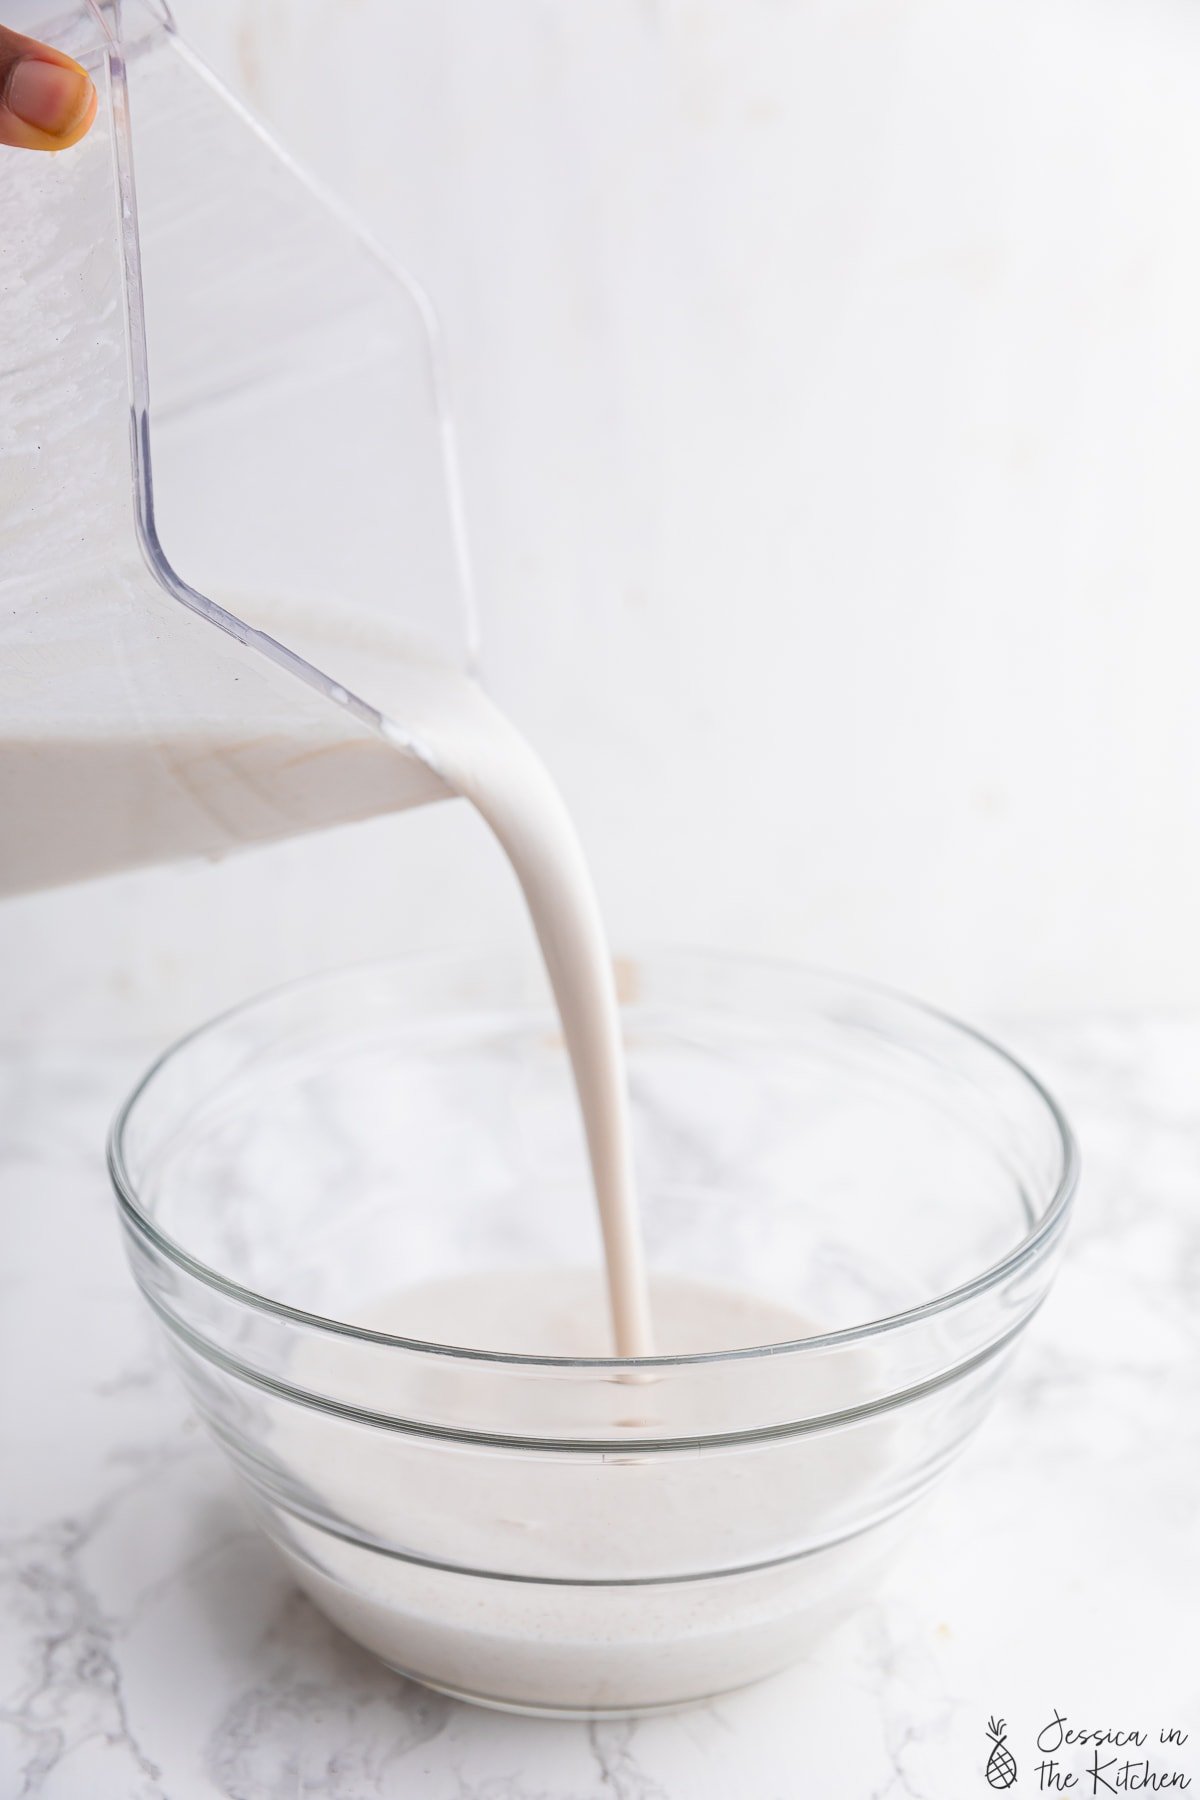 Cashew coconut milk liquid being poured into a bowl.